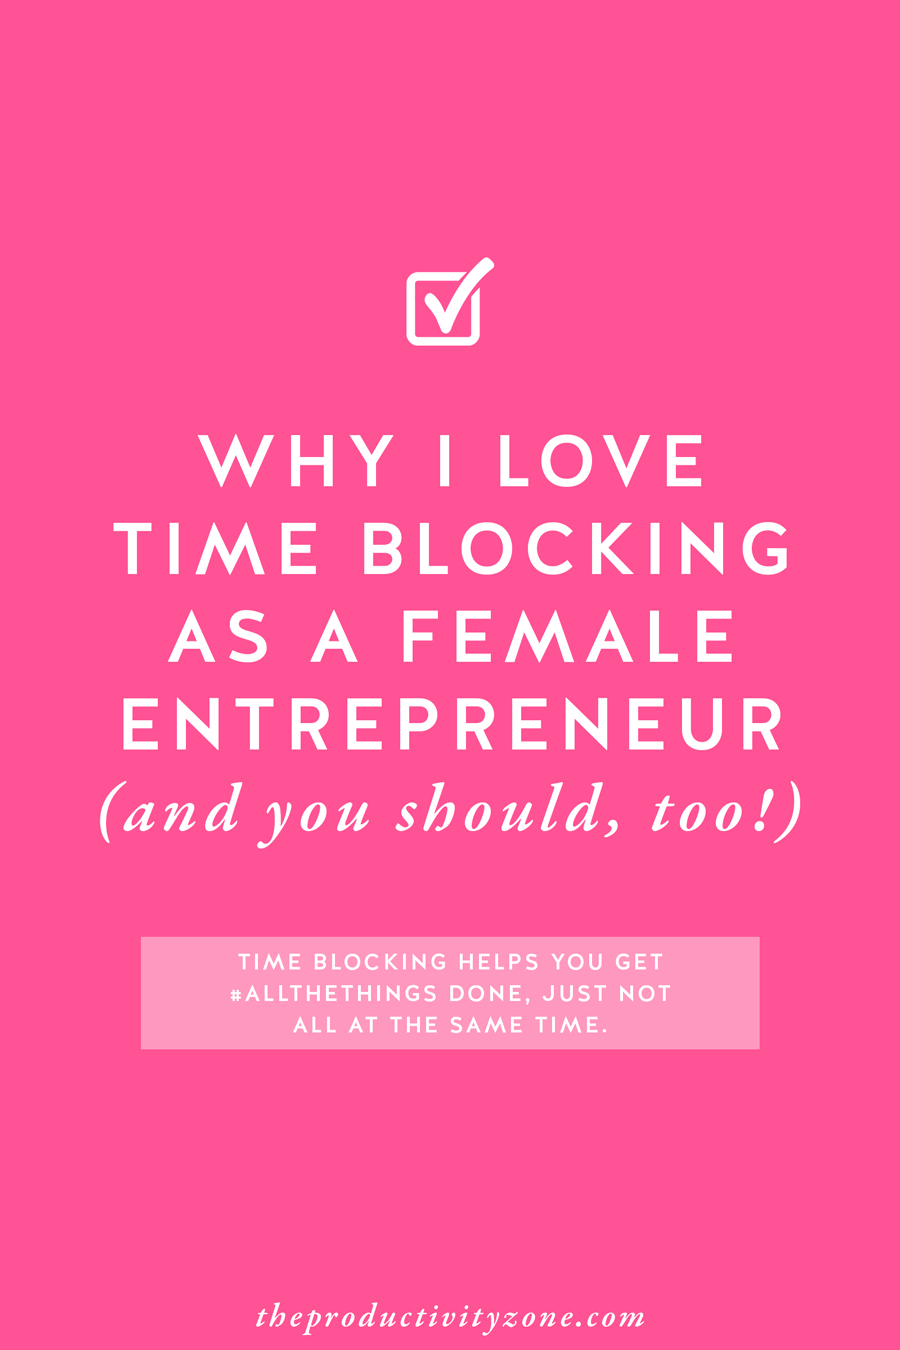 Time blocking is a very effective way of getting all the things done, just not all at the same time. It’s actually my favorite time management technique as a female entrepreneur!! I’m sharing more about why I love it on The Productivity Zone!!